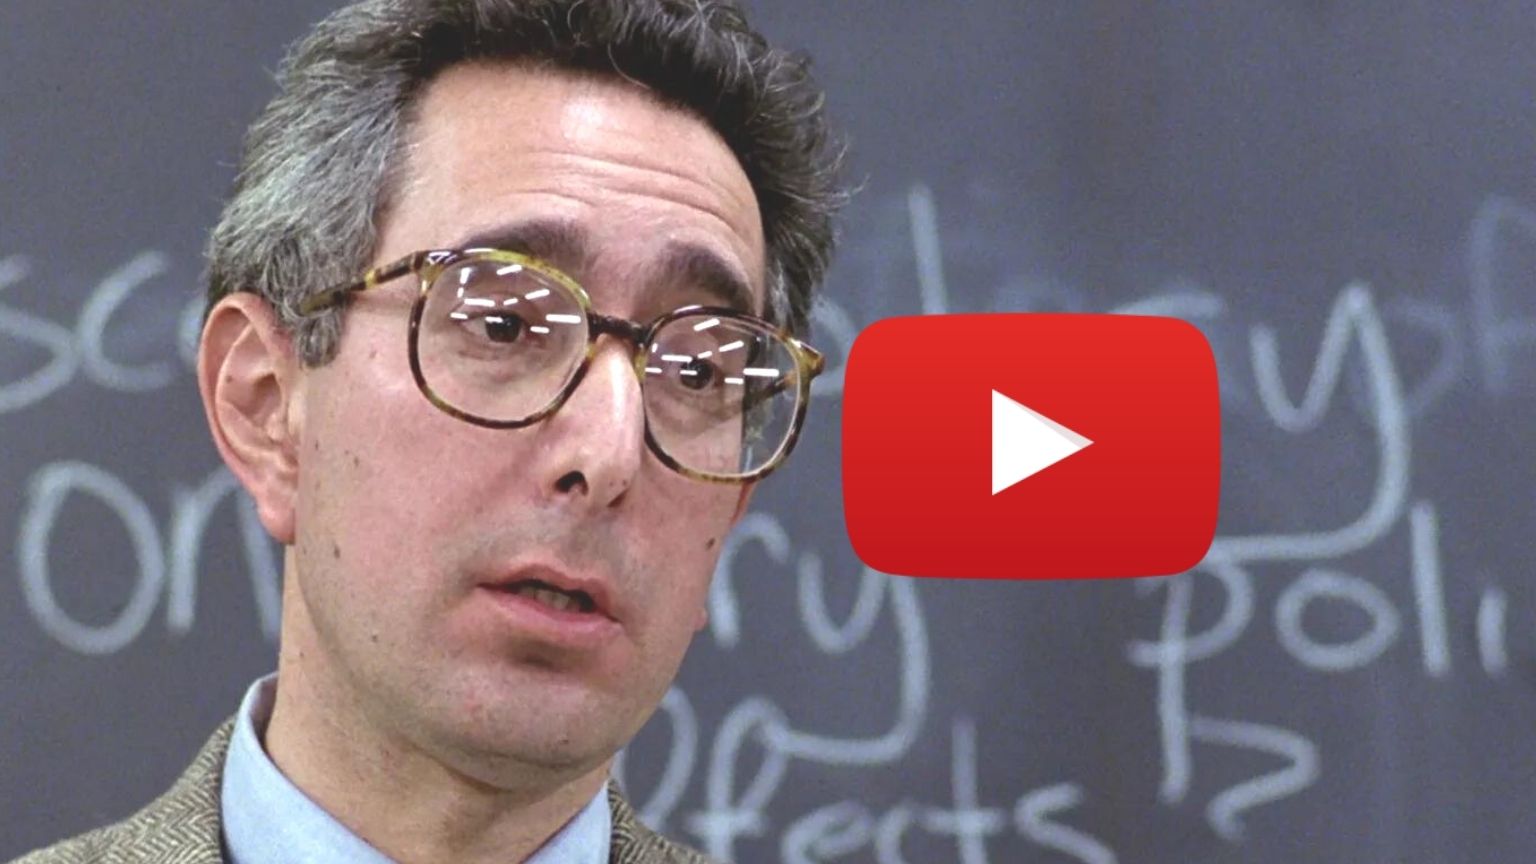 Writer and actor Ben Stein suspended from YouTube for COVID questions